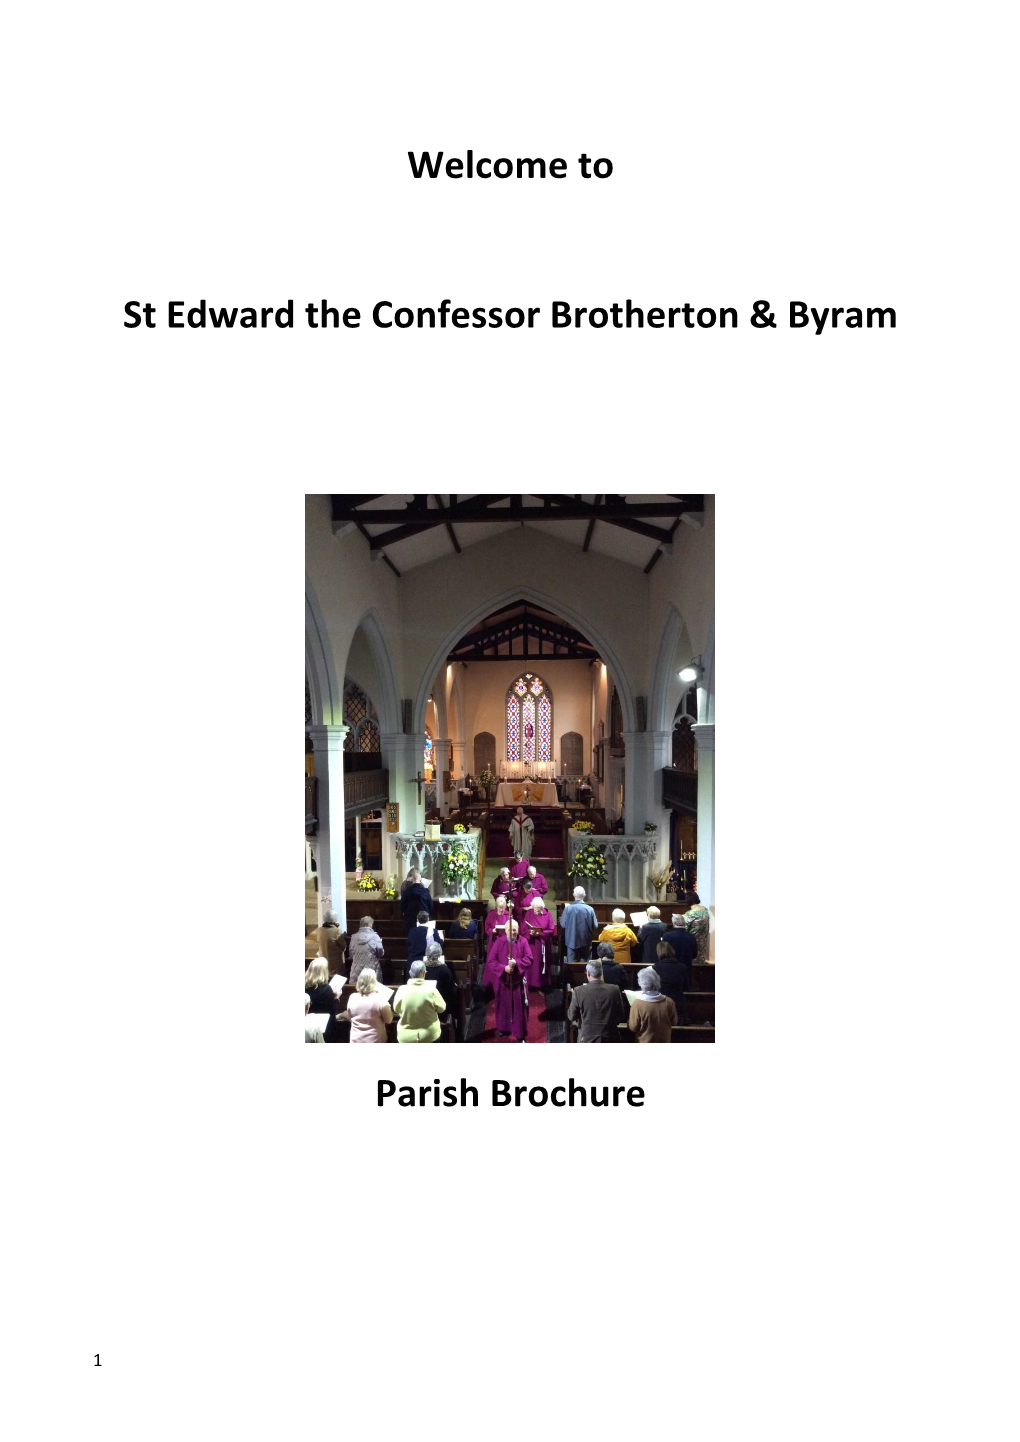 Welcome to St Edward the Confessor Brotherton & Byram Parish Brochure